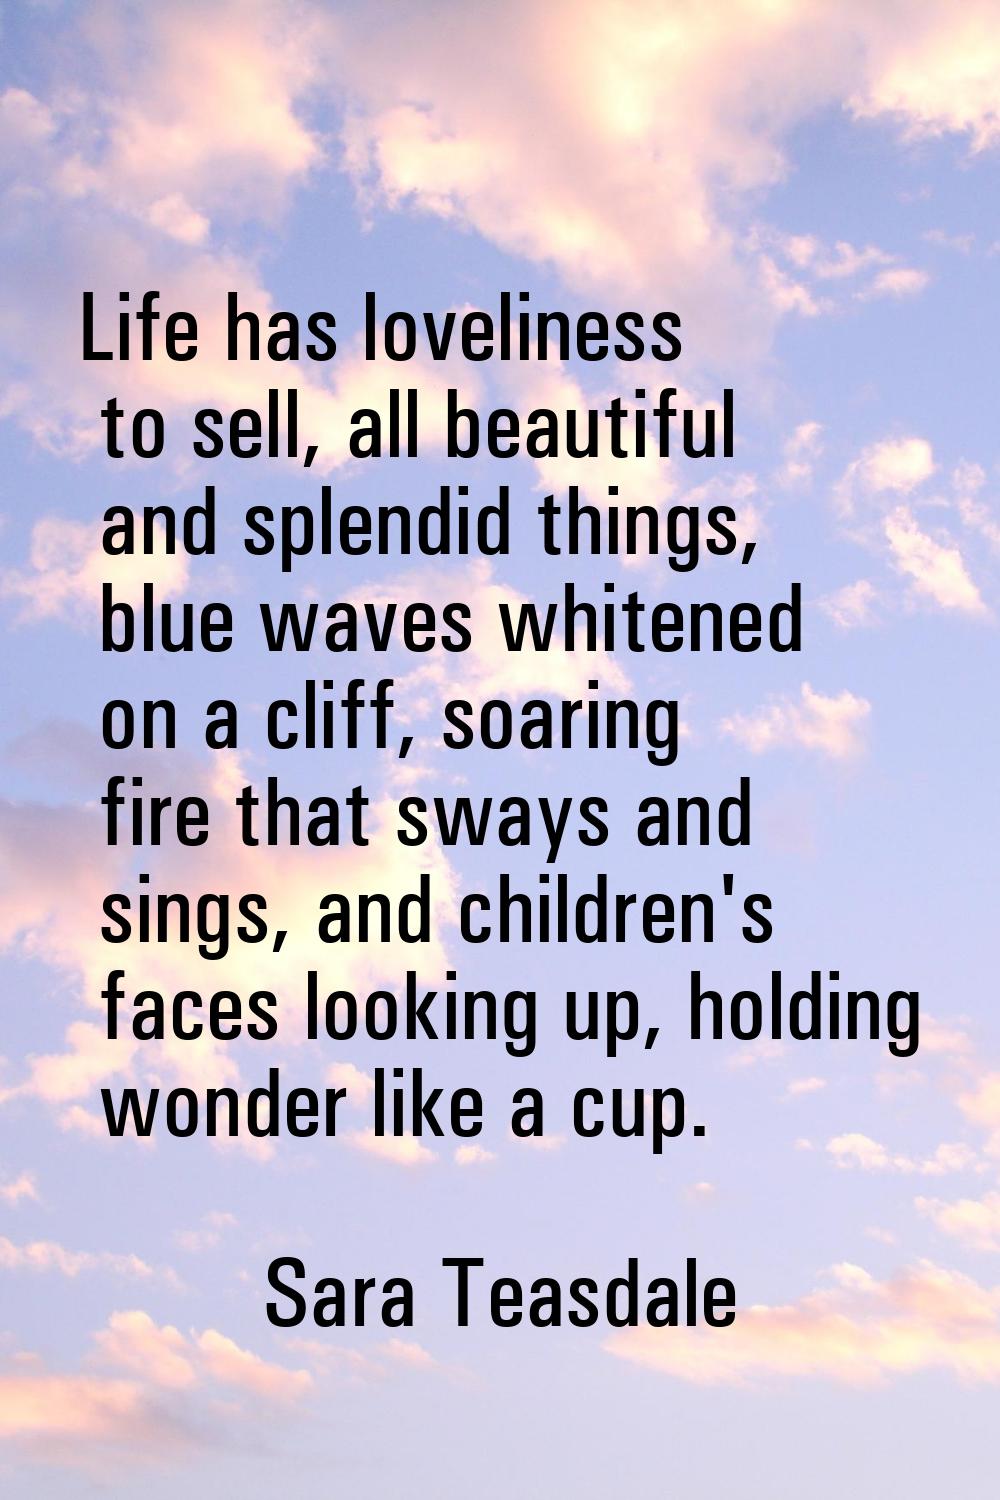 Life has loveliness to sell, all beautiful and splendid things, blue waves whitened on a cliff, soa